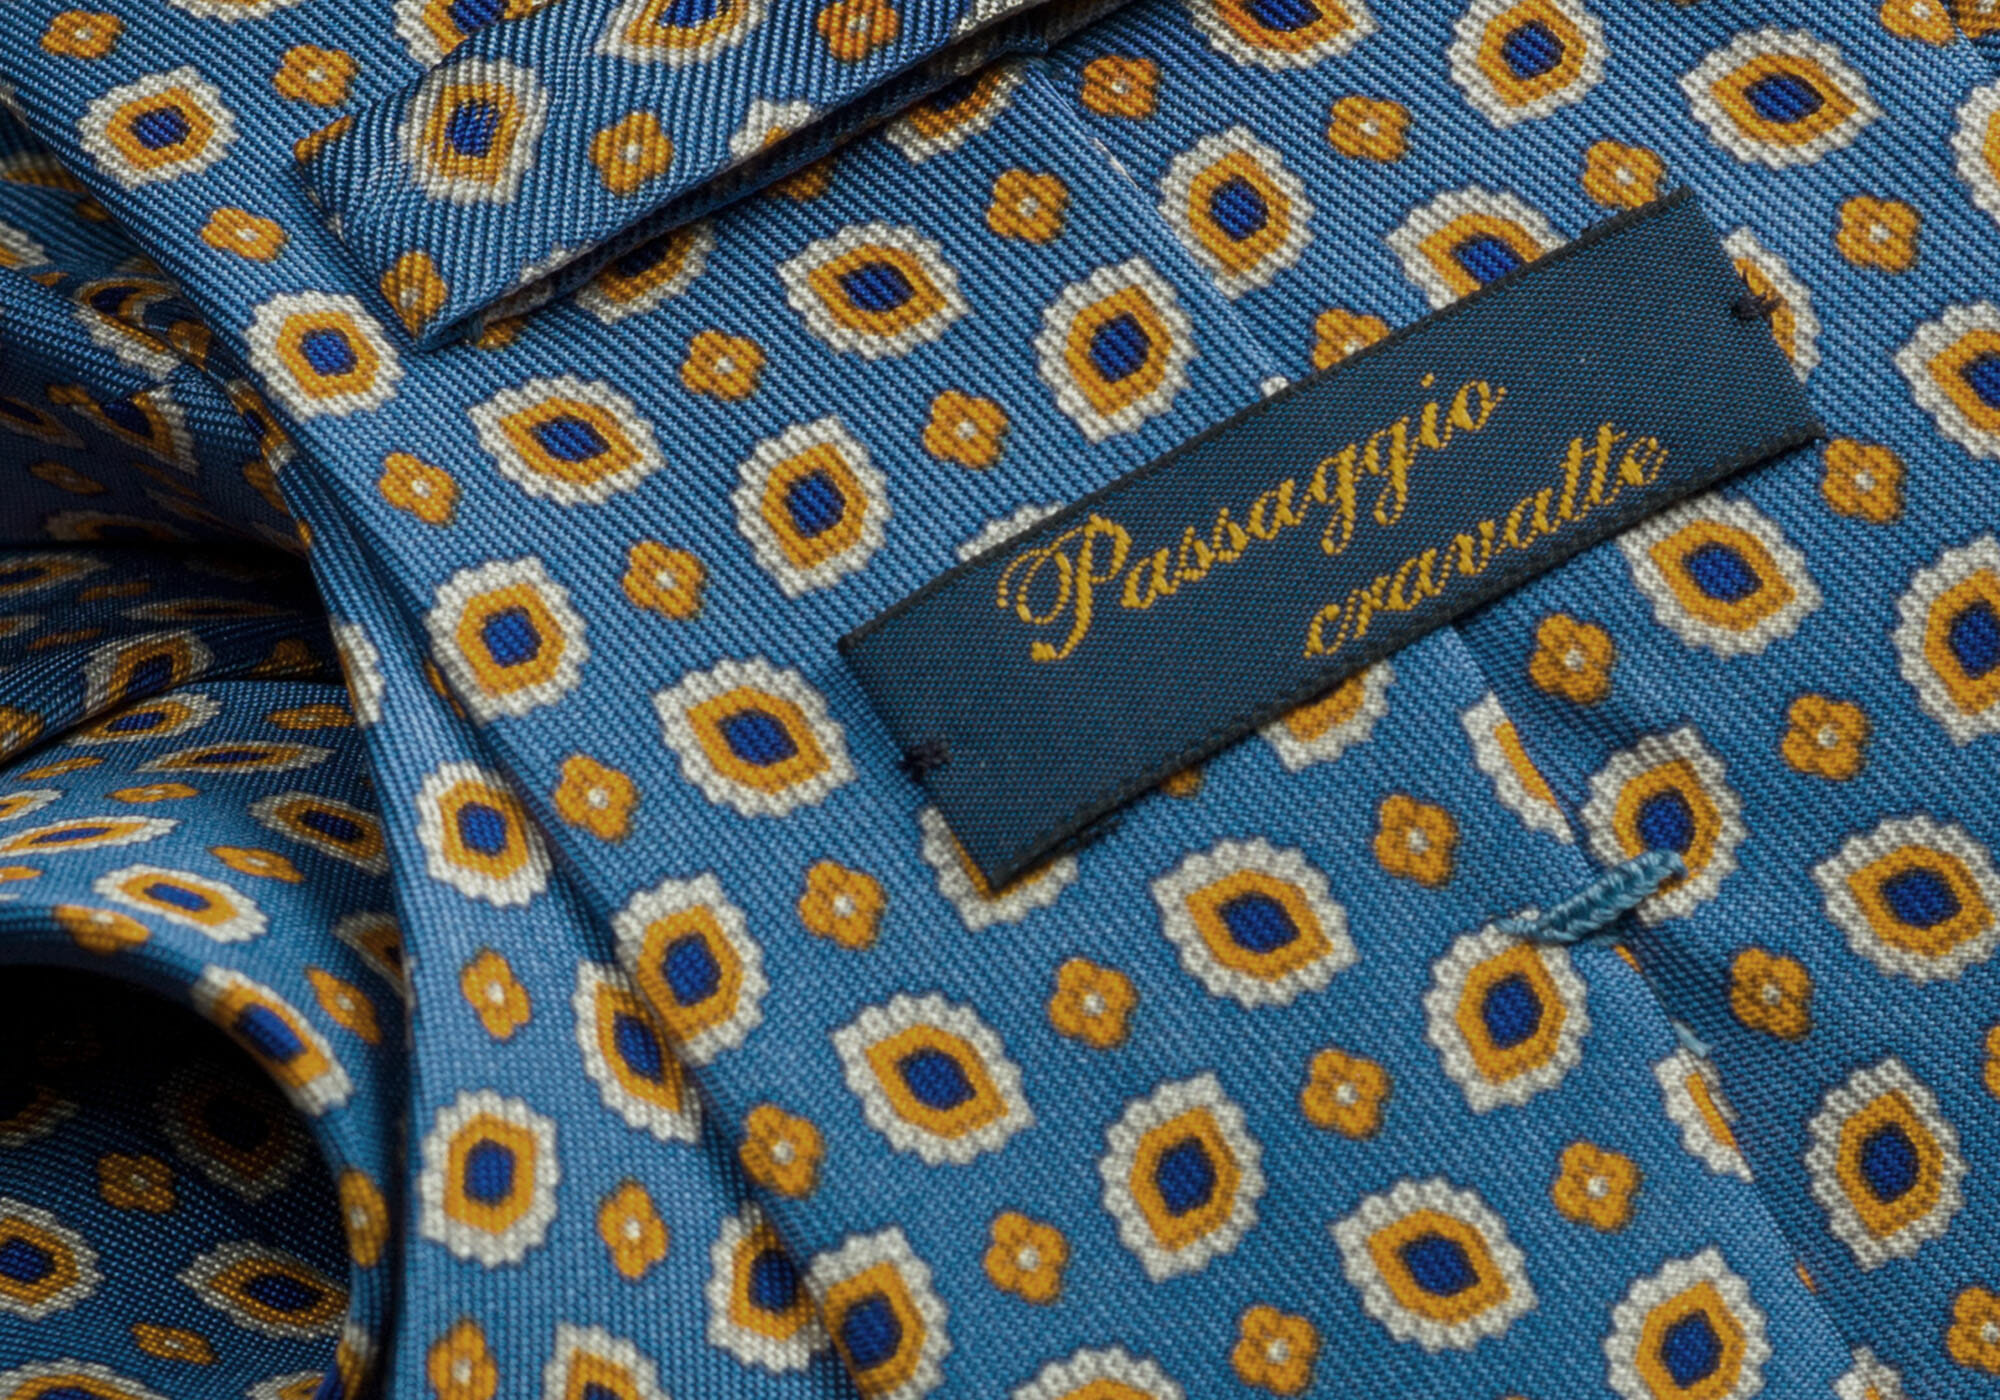 A close-up of the handiwork on a necktie from Passaggio Cravatte.